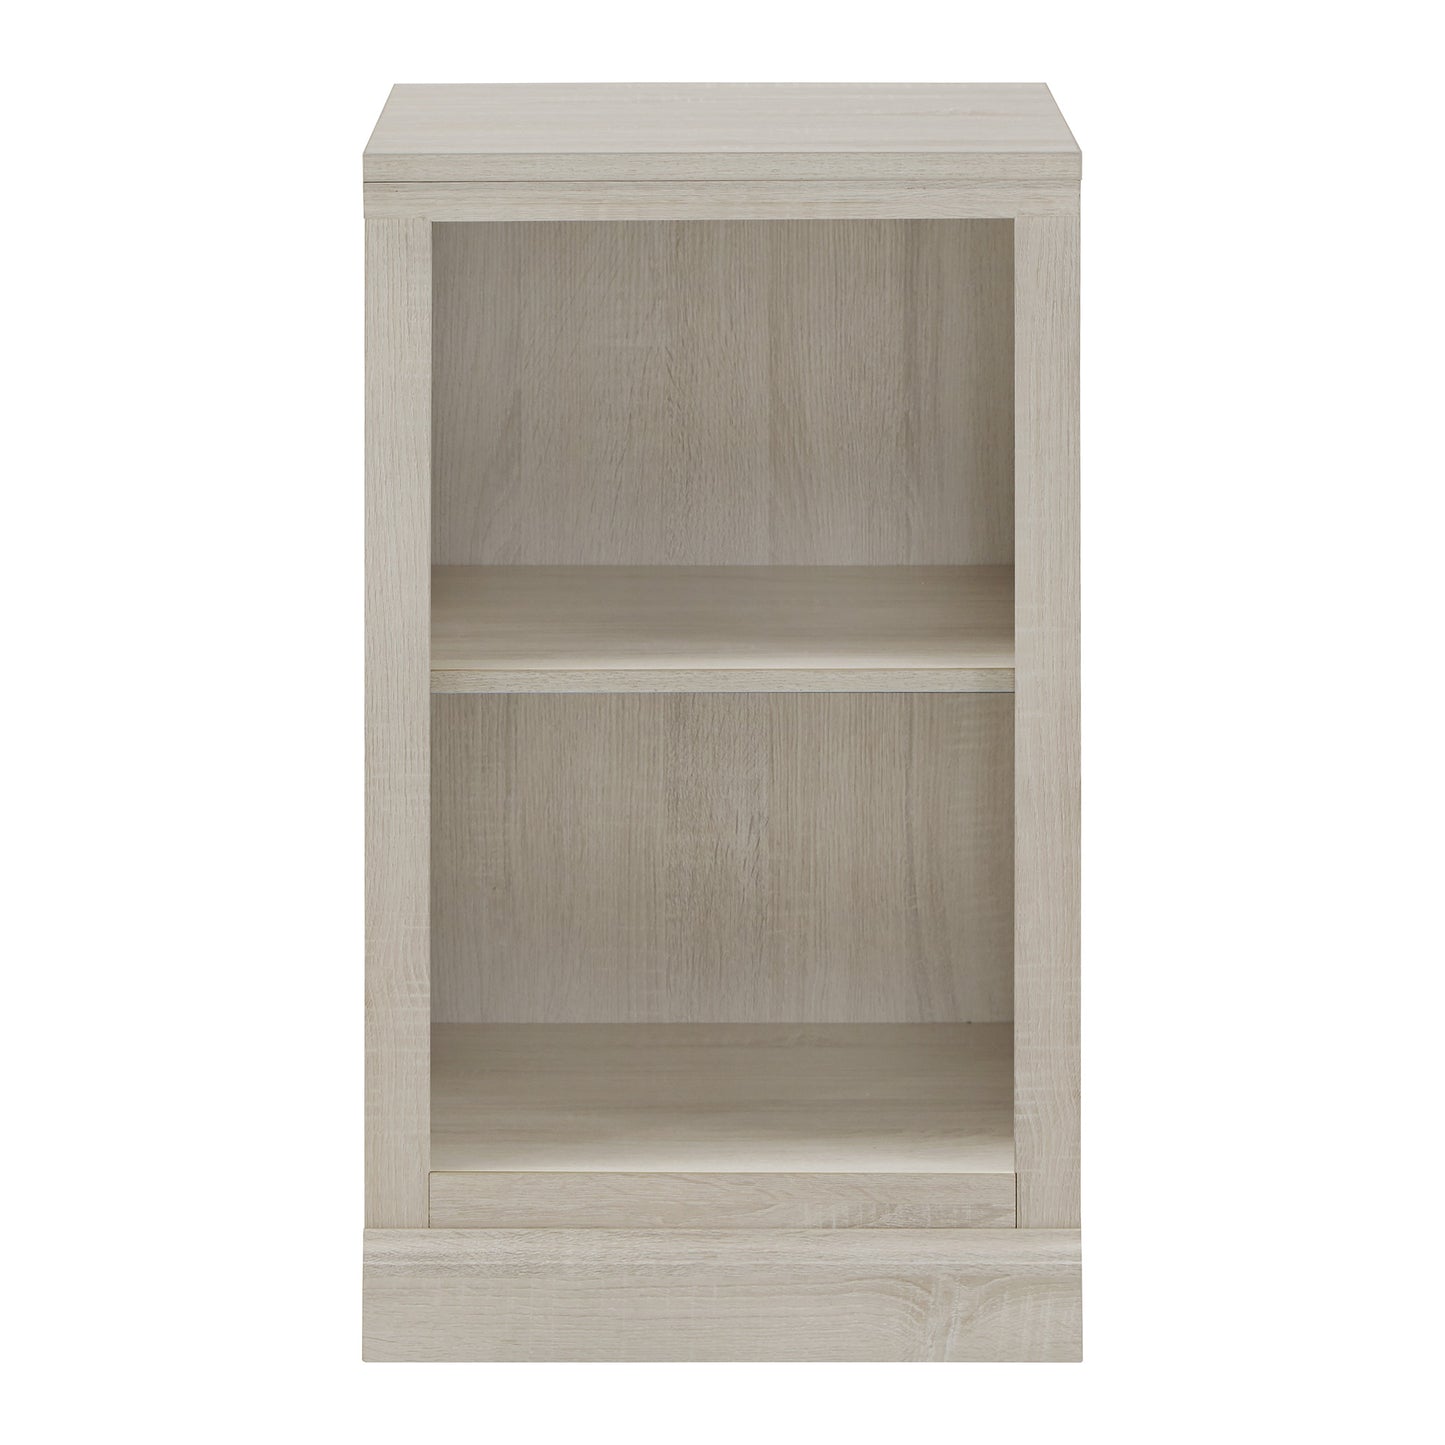 40 in. Corner Desk with USB Chargers and 3-drawer File Cabinet - Antique White Finish